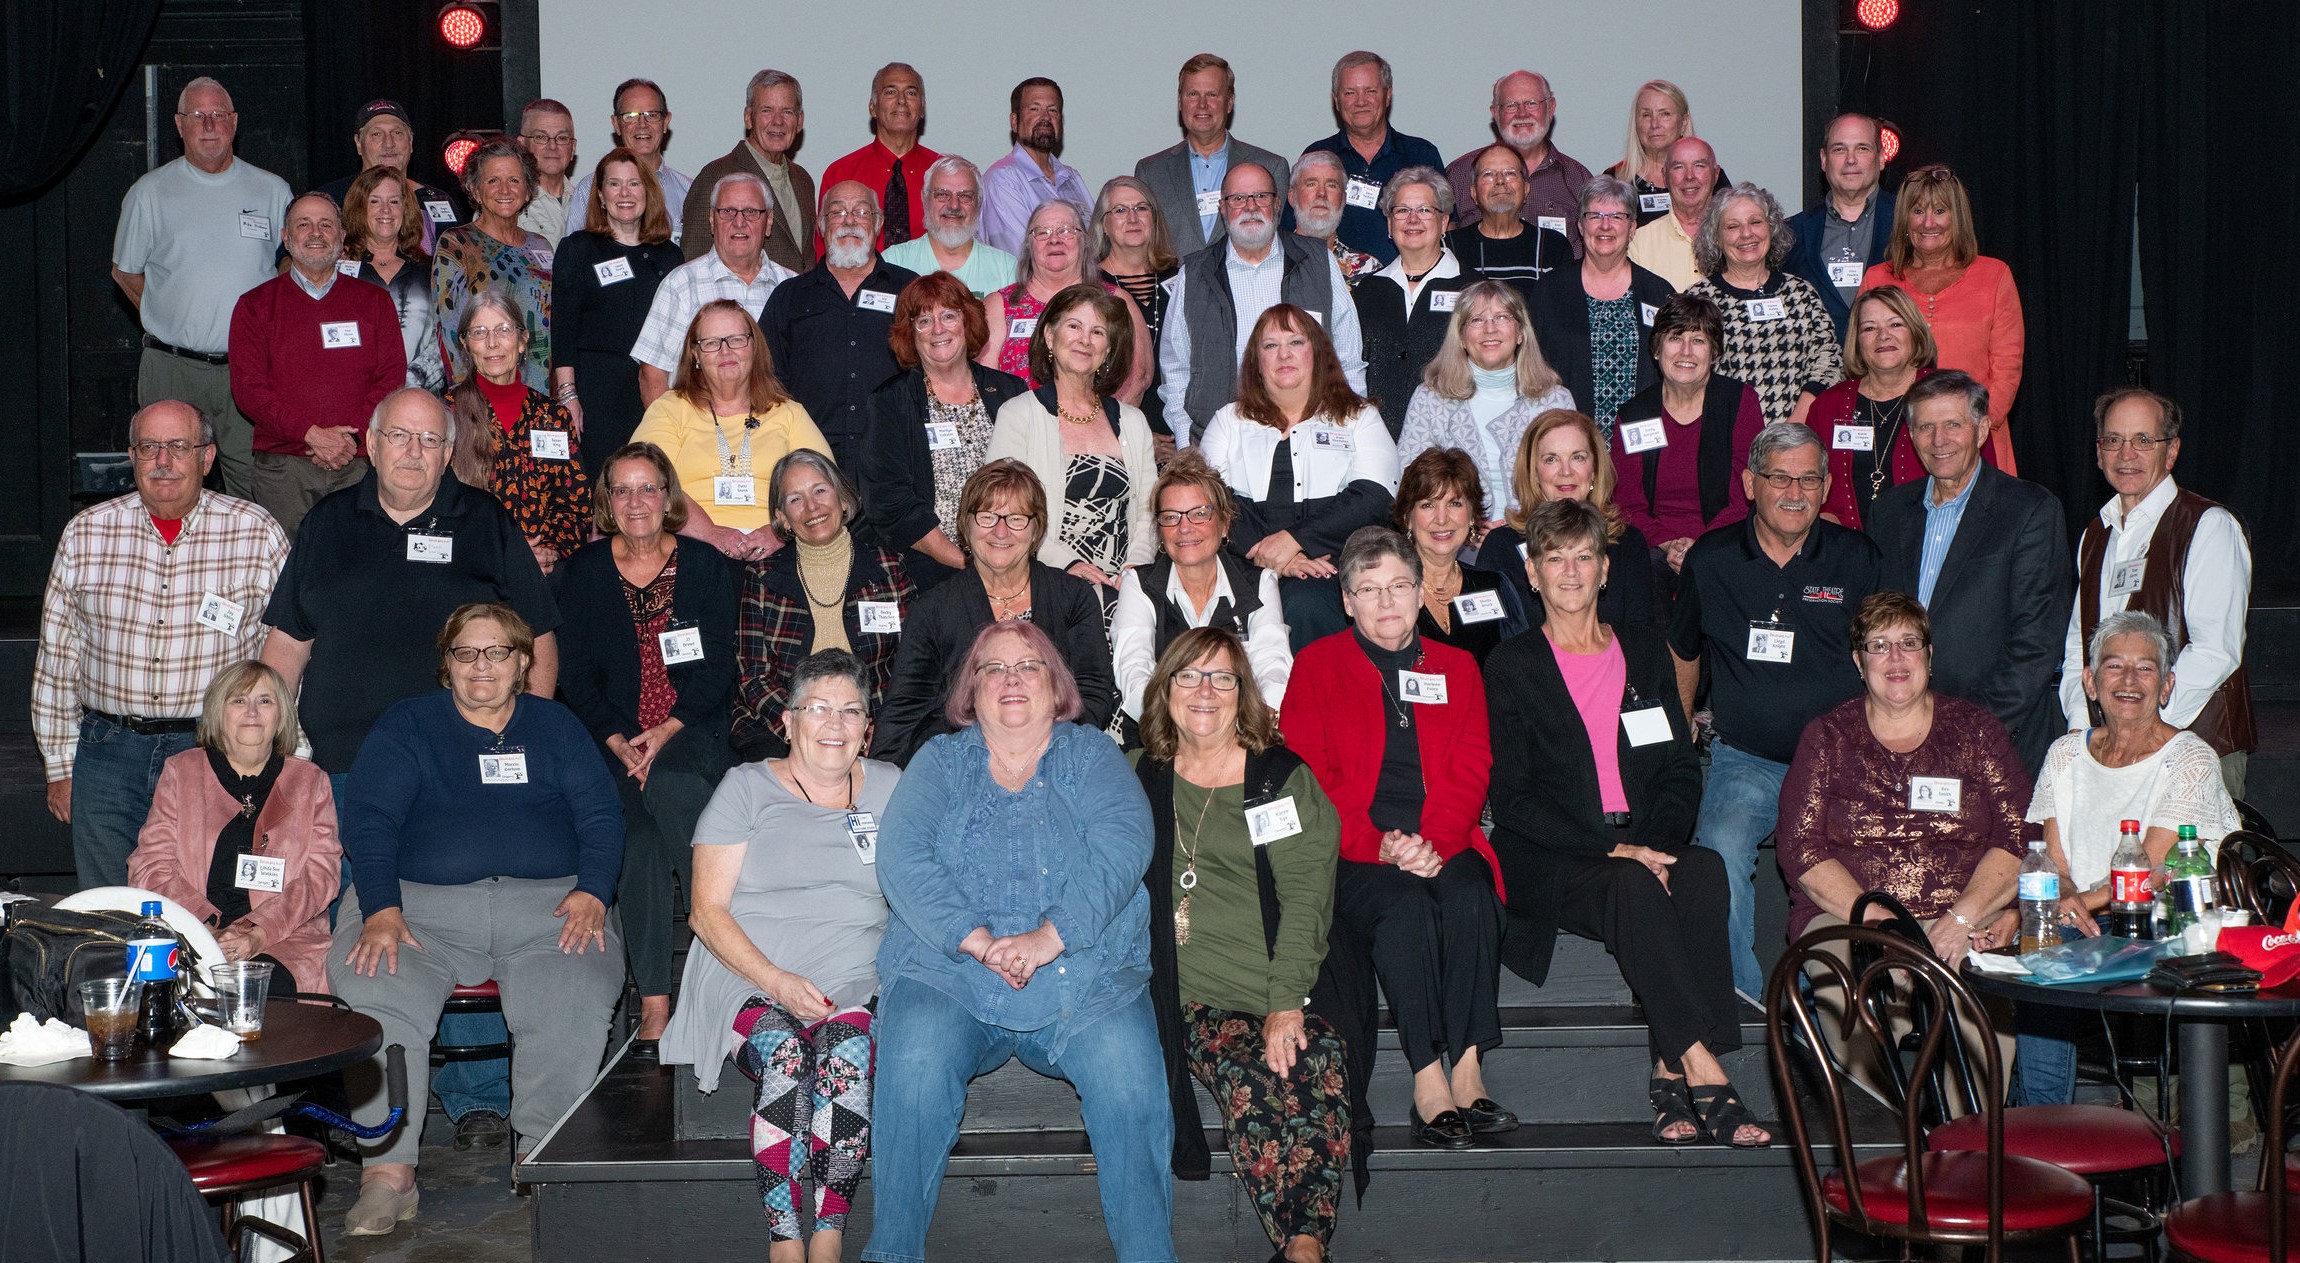 50 Year Reunion Class Photo at the State Theatre - October 23, 2021